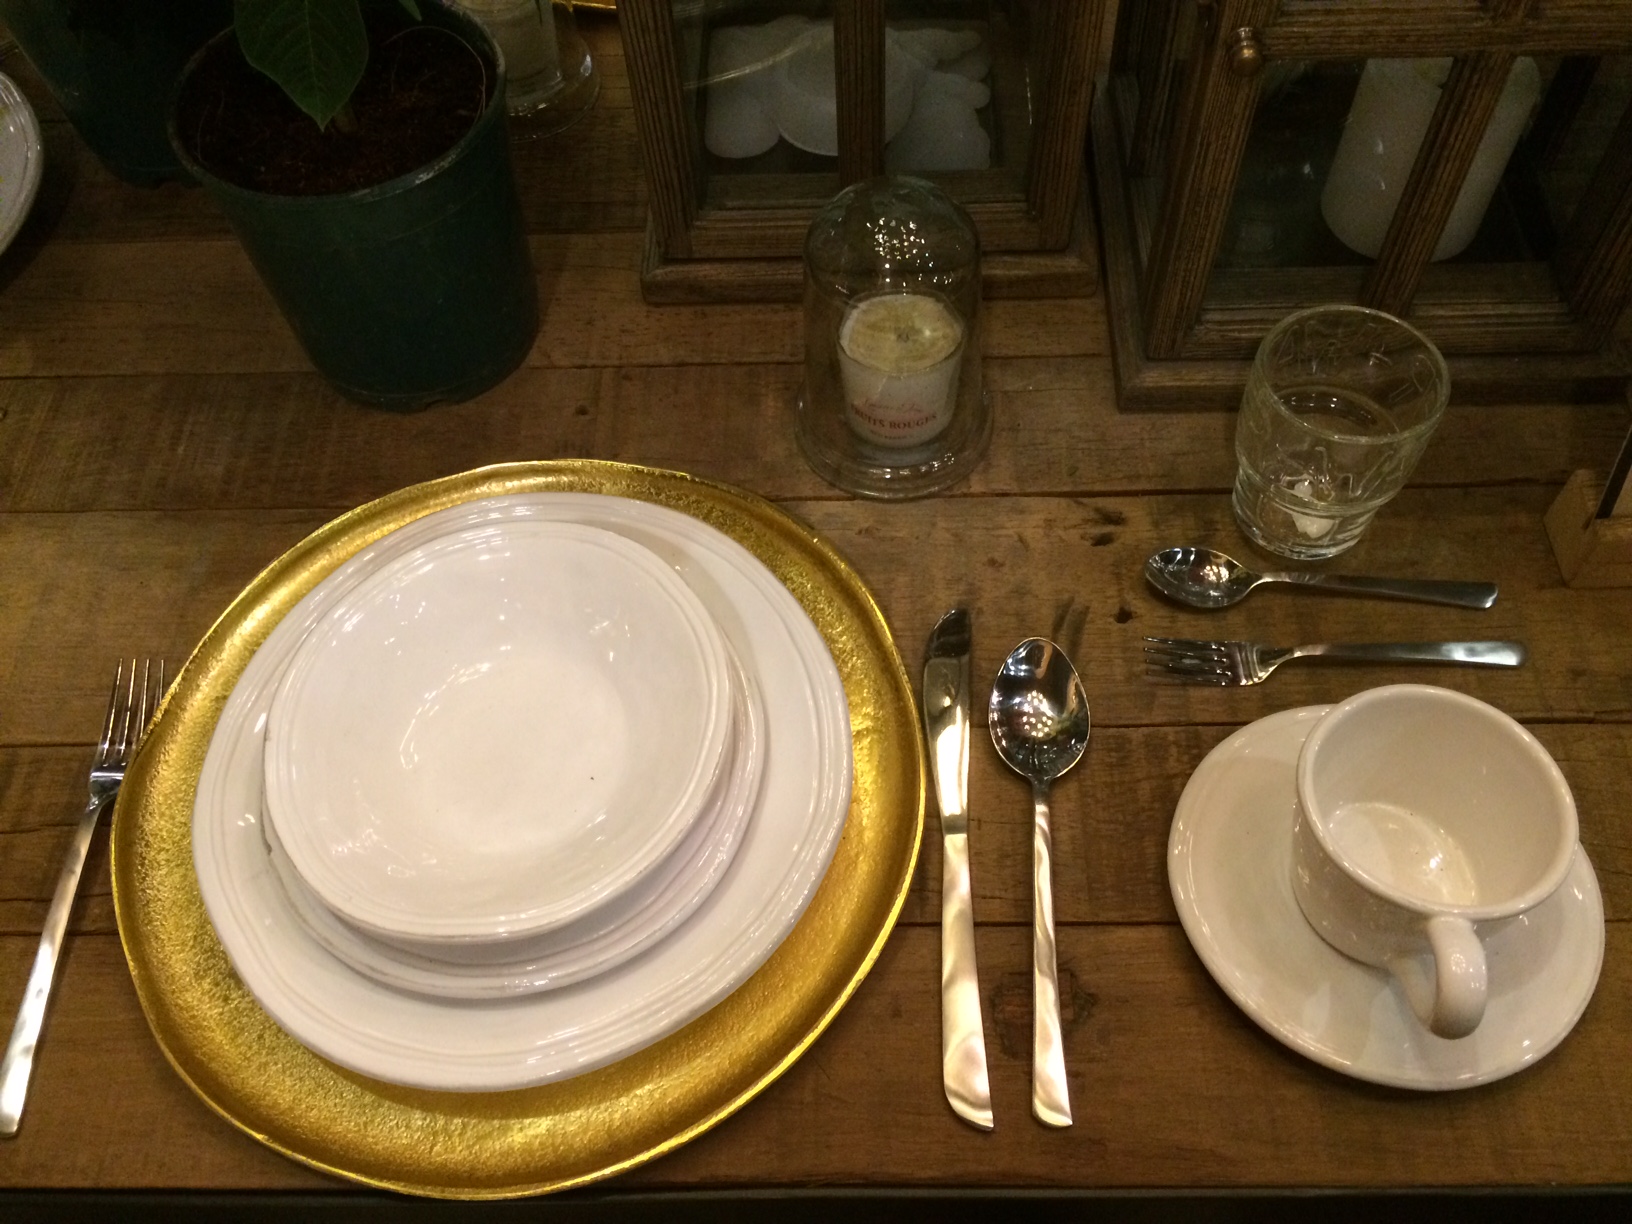 Table-setting with plates from France. PHOTO: ANNE A. JAMBORA